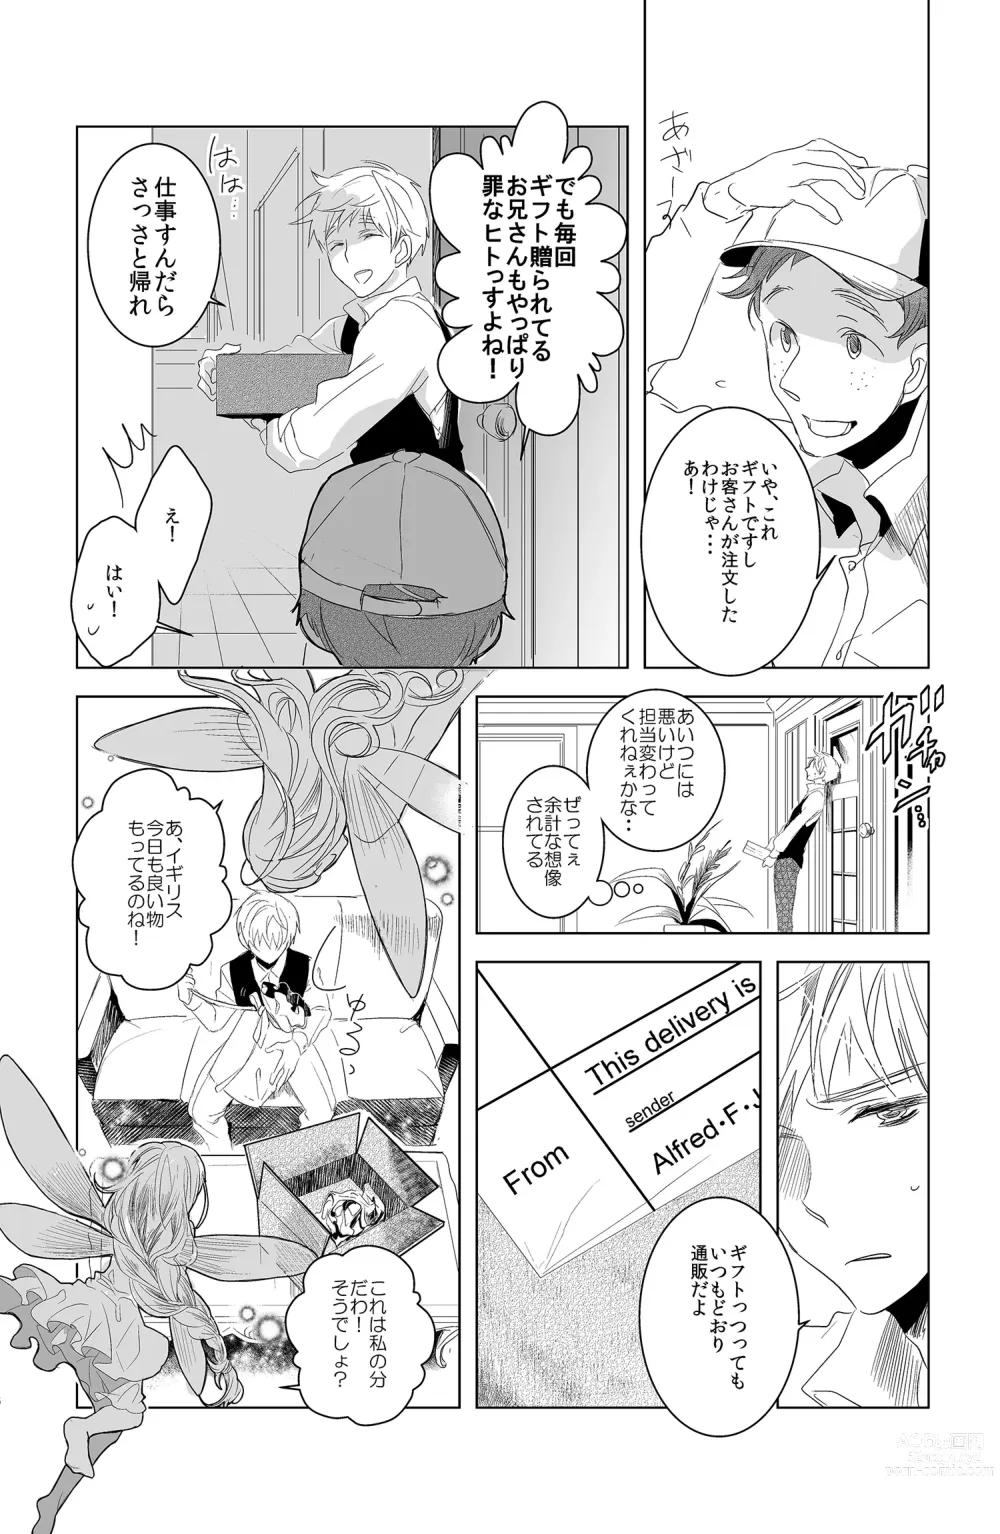 Page 7 of doujinshi Flare Pierce